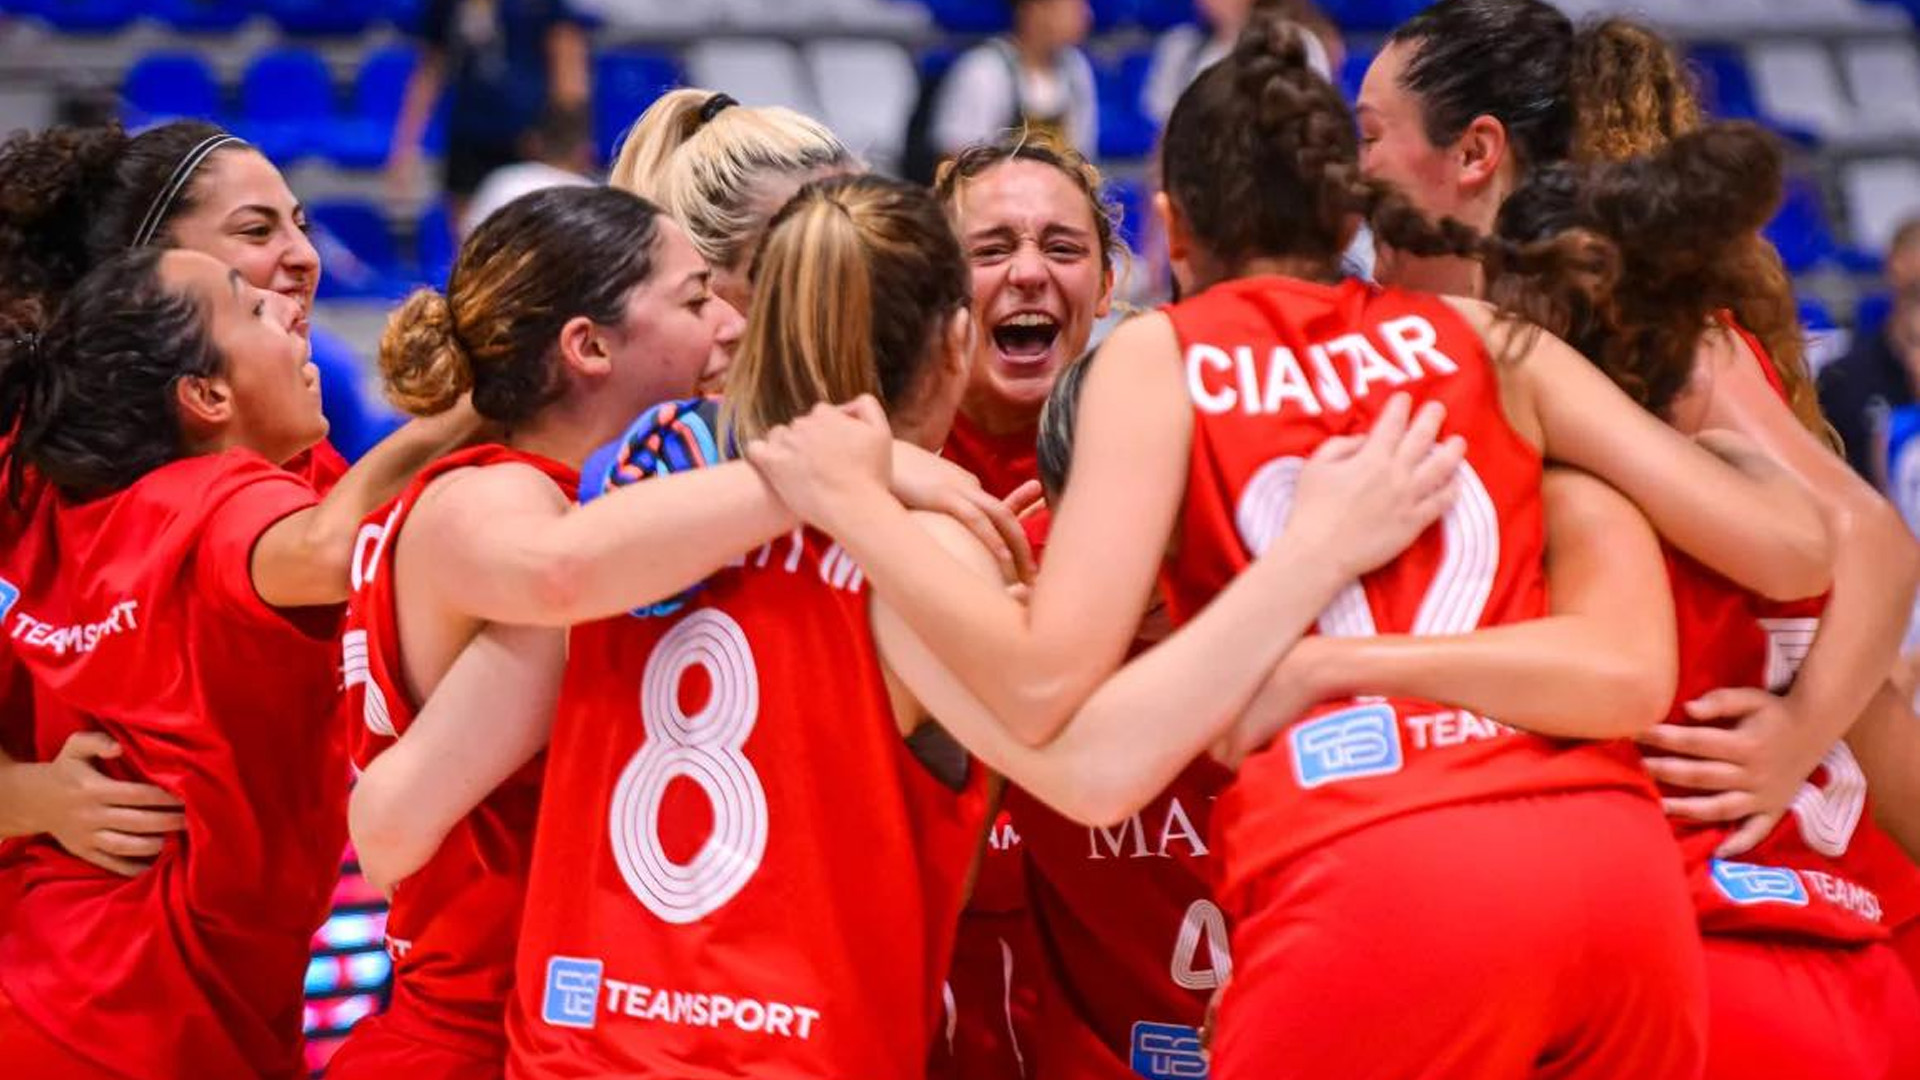 Malta's Basketball Women Topple Cyprus To Secure Top Group Spot